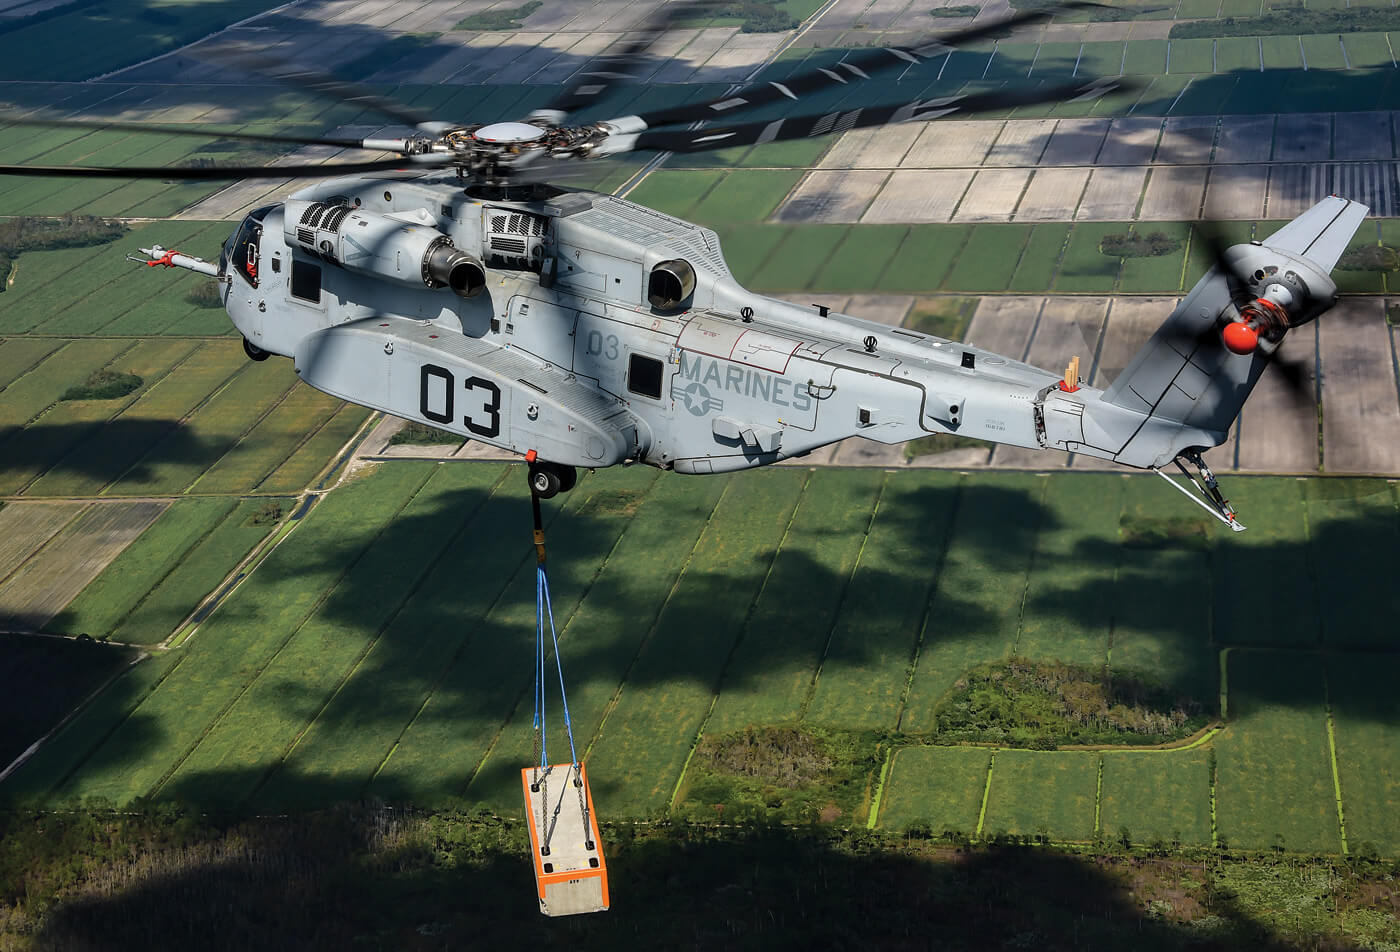 The CH-53 legacy spans more than 50 years, with the YCH-53A having made its first flight on Oct. 14, 1964. The CH-53K may look similar to previous 53 models, but it is a fundamentally different, more capable aircraft. Mike Reyno Photos